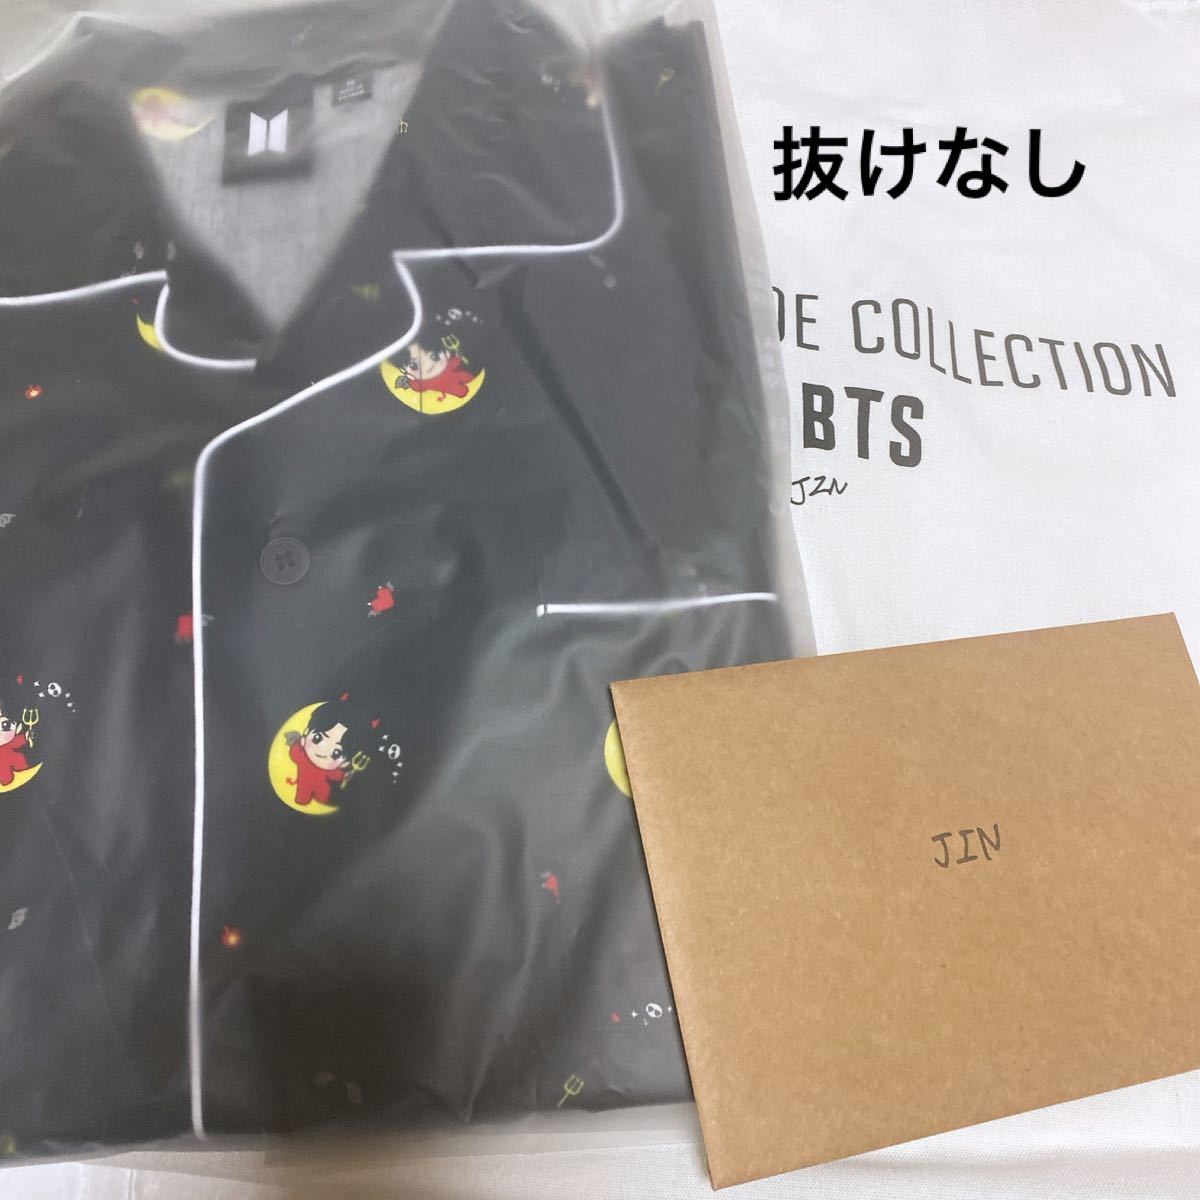 BTS ジン M bts 悪魔 [JIN] BAD DAY ARTIST MADE COLLECTION BTS